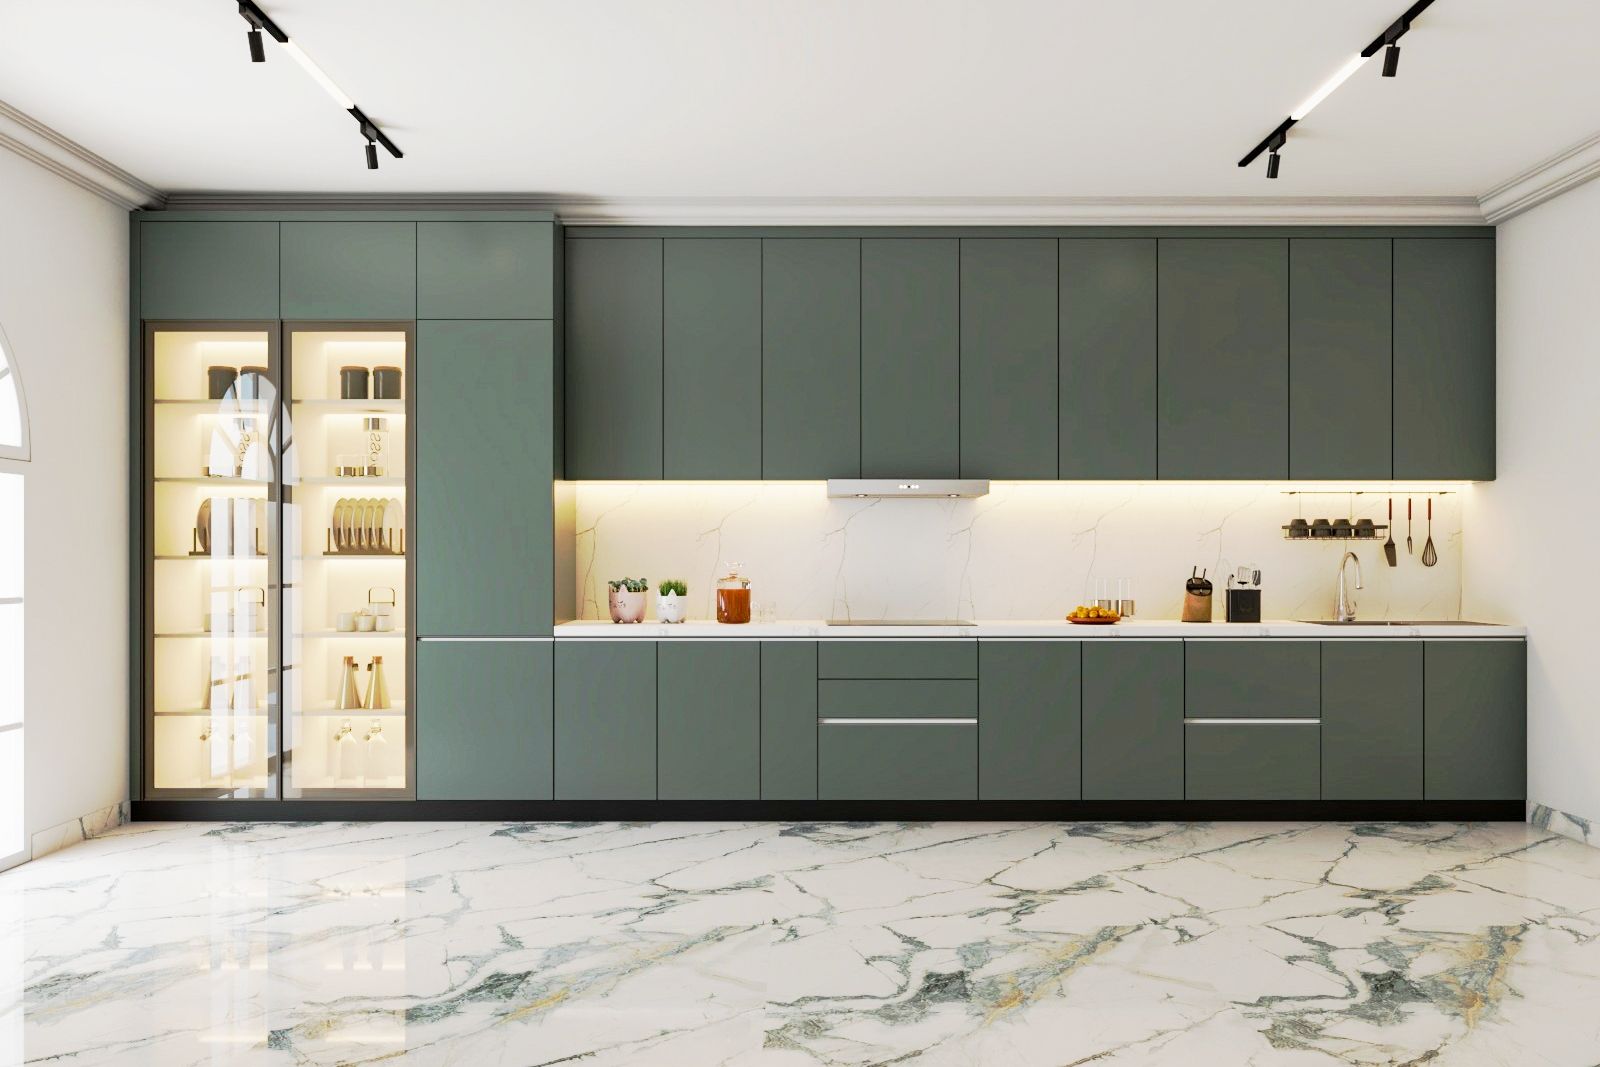 Modern Straight Modular Kitchen Design With Elefante Green Cabinets And Marble Countertop